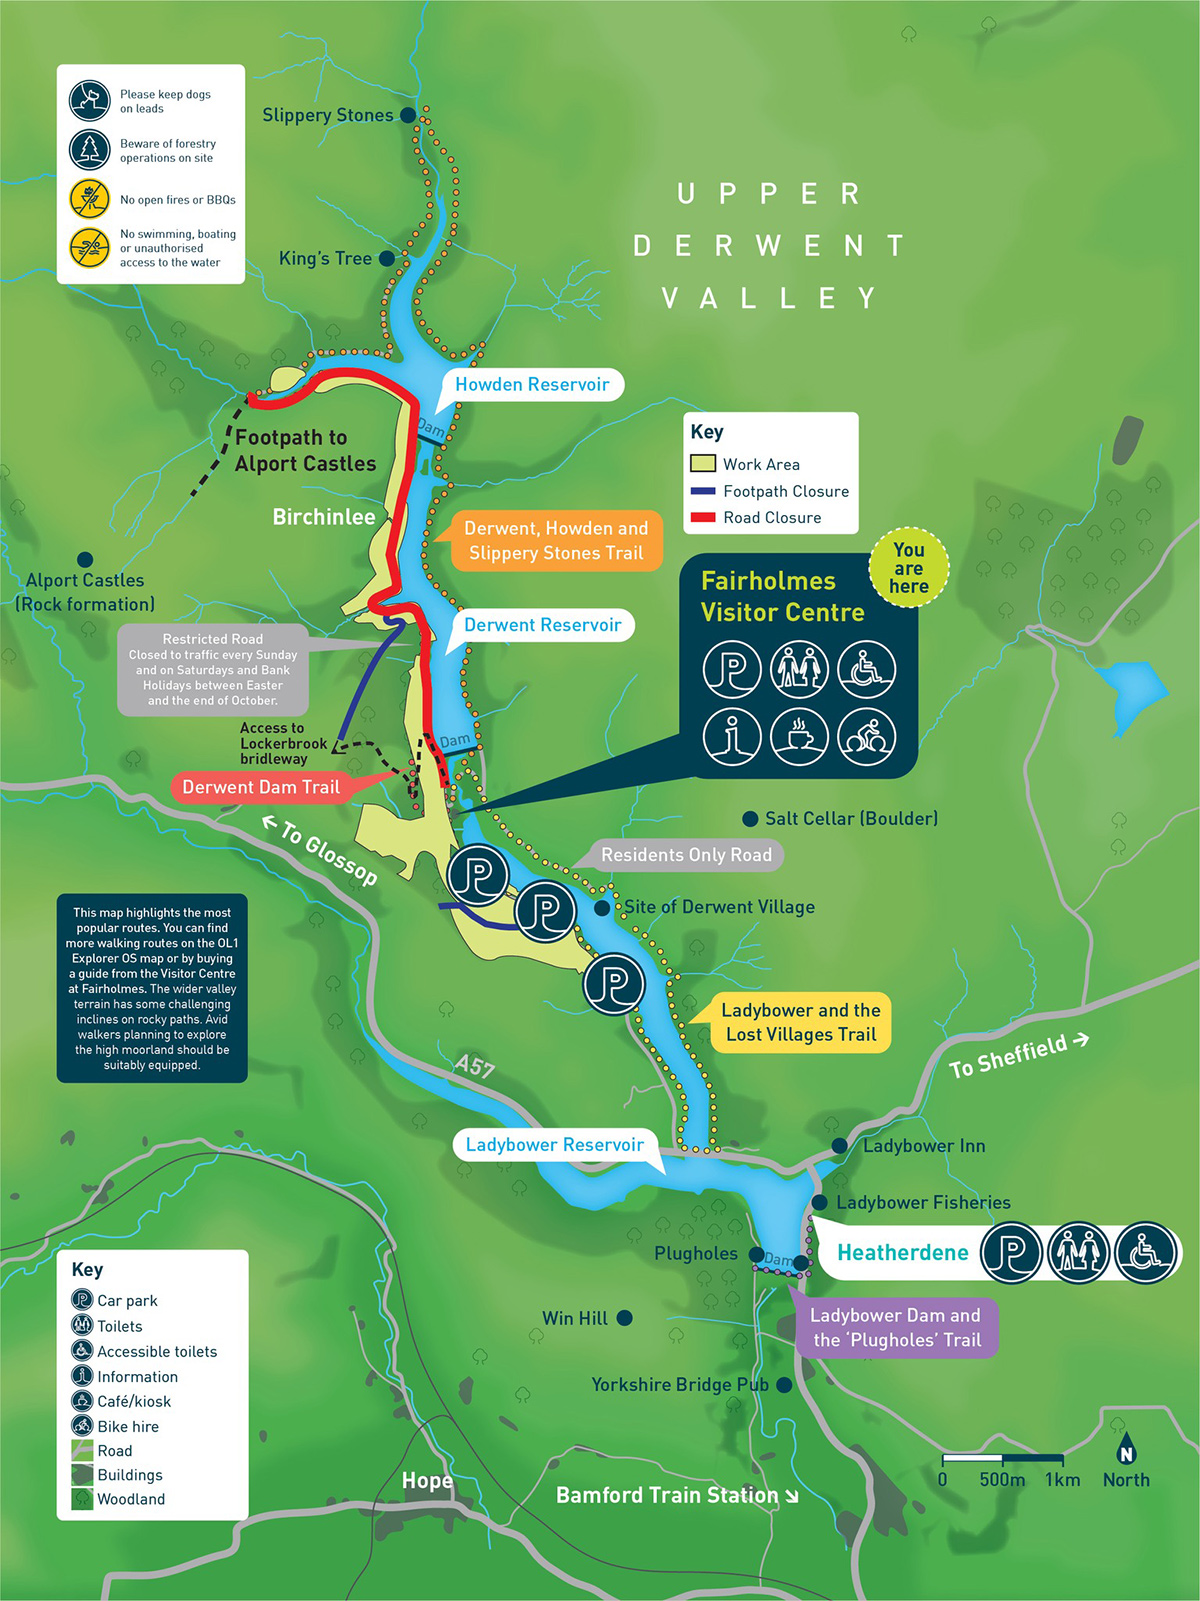 Map detailing the Derwent Valley roar and path closures of September-November 2022